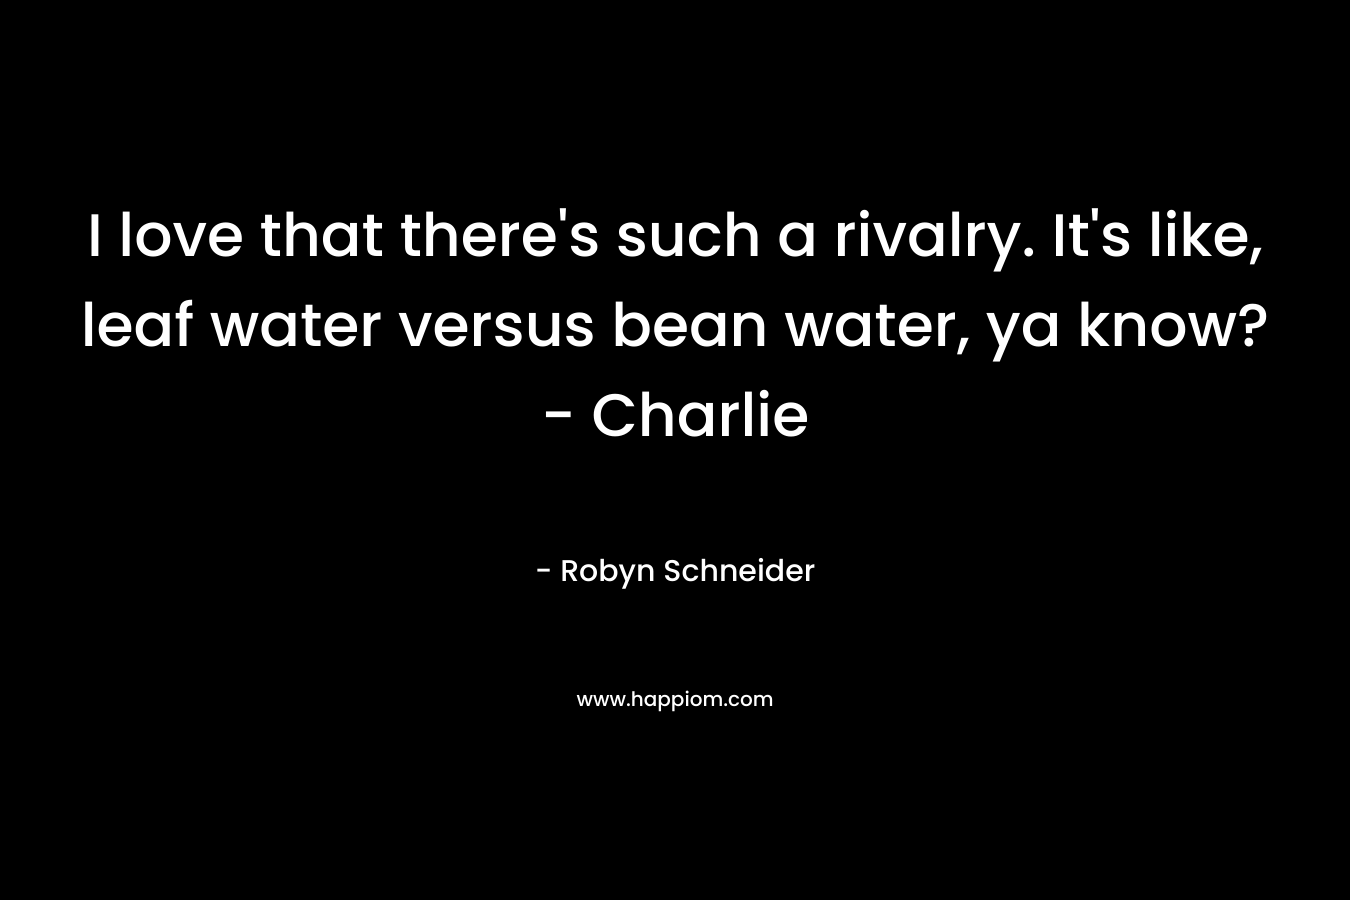 I love that there's such a rivalry. It's like, leaf water versus bean water, ya know? - Charlie